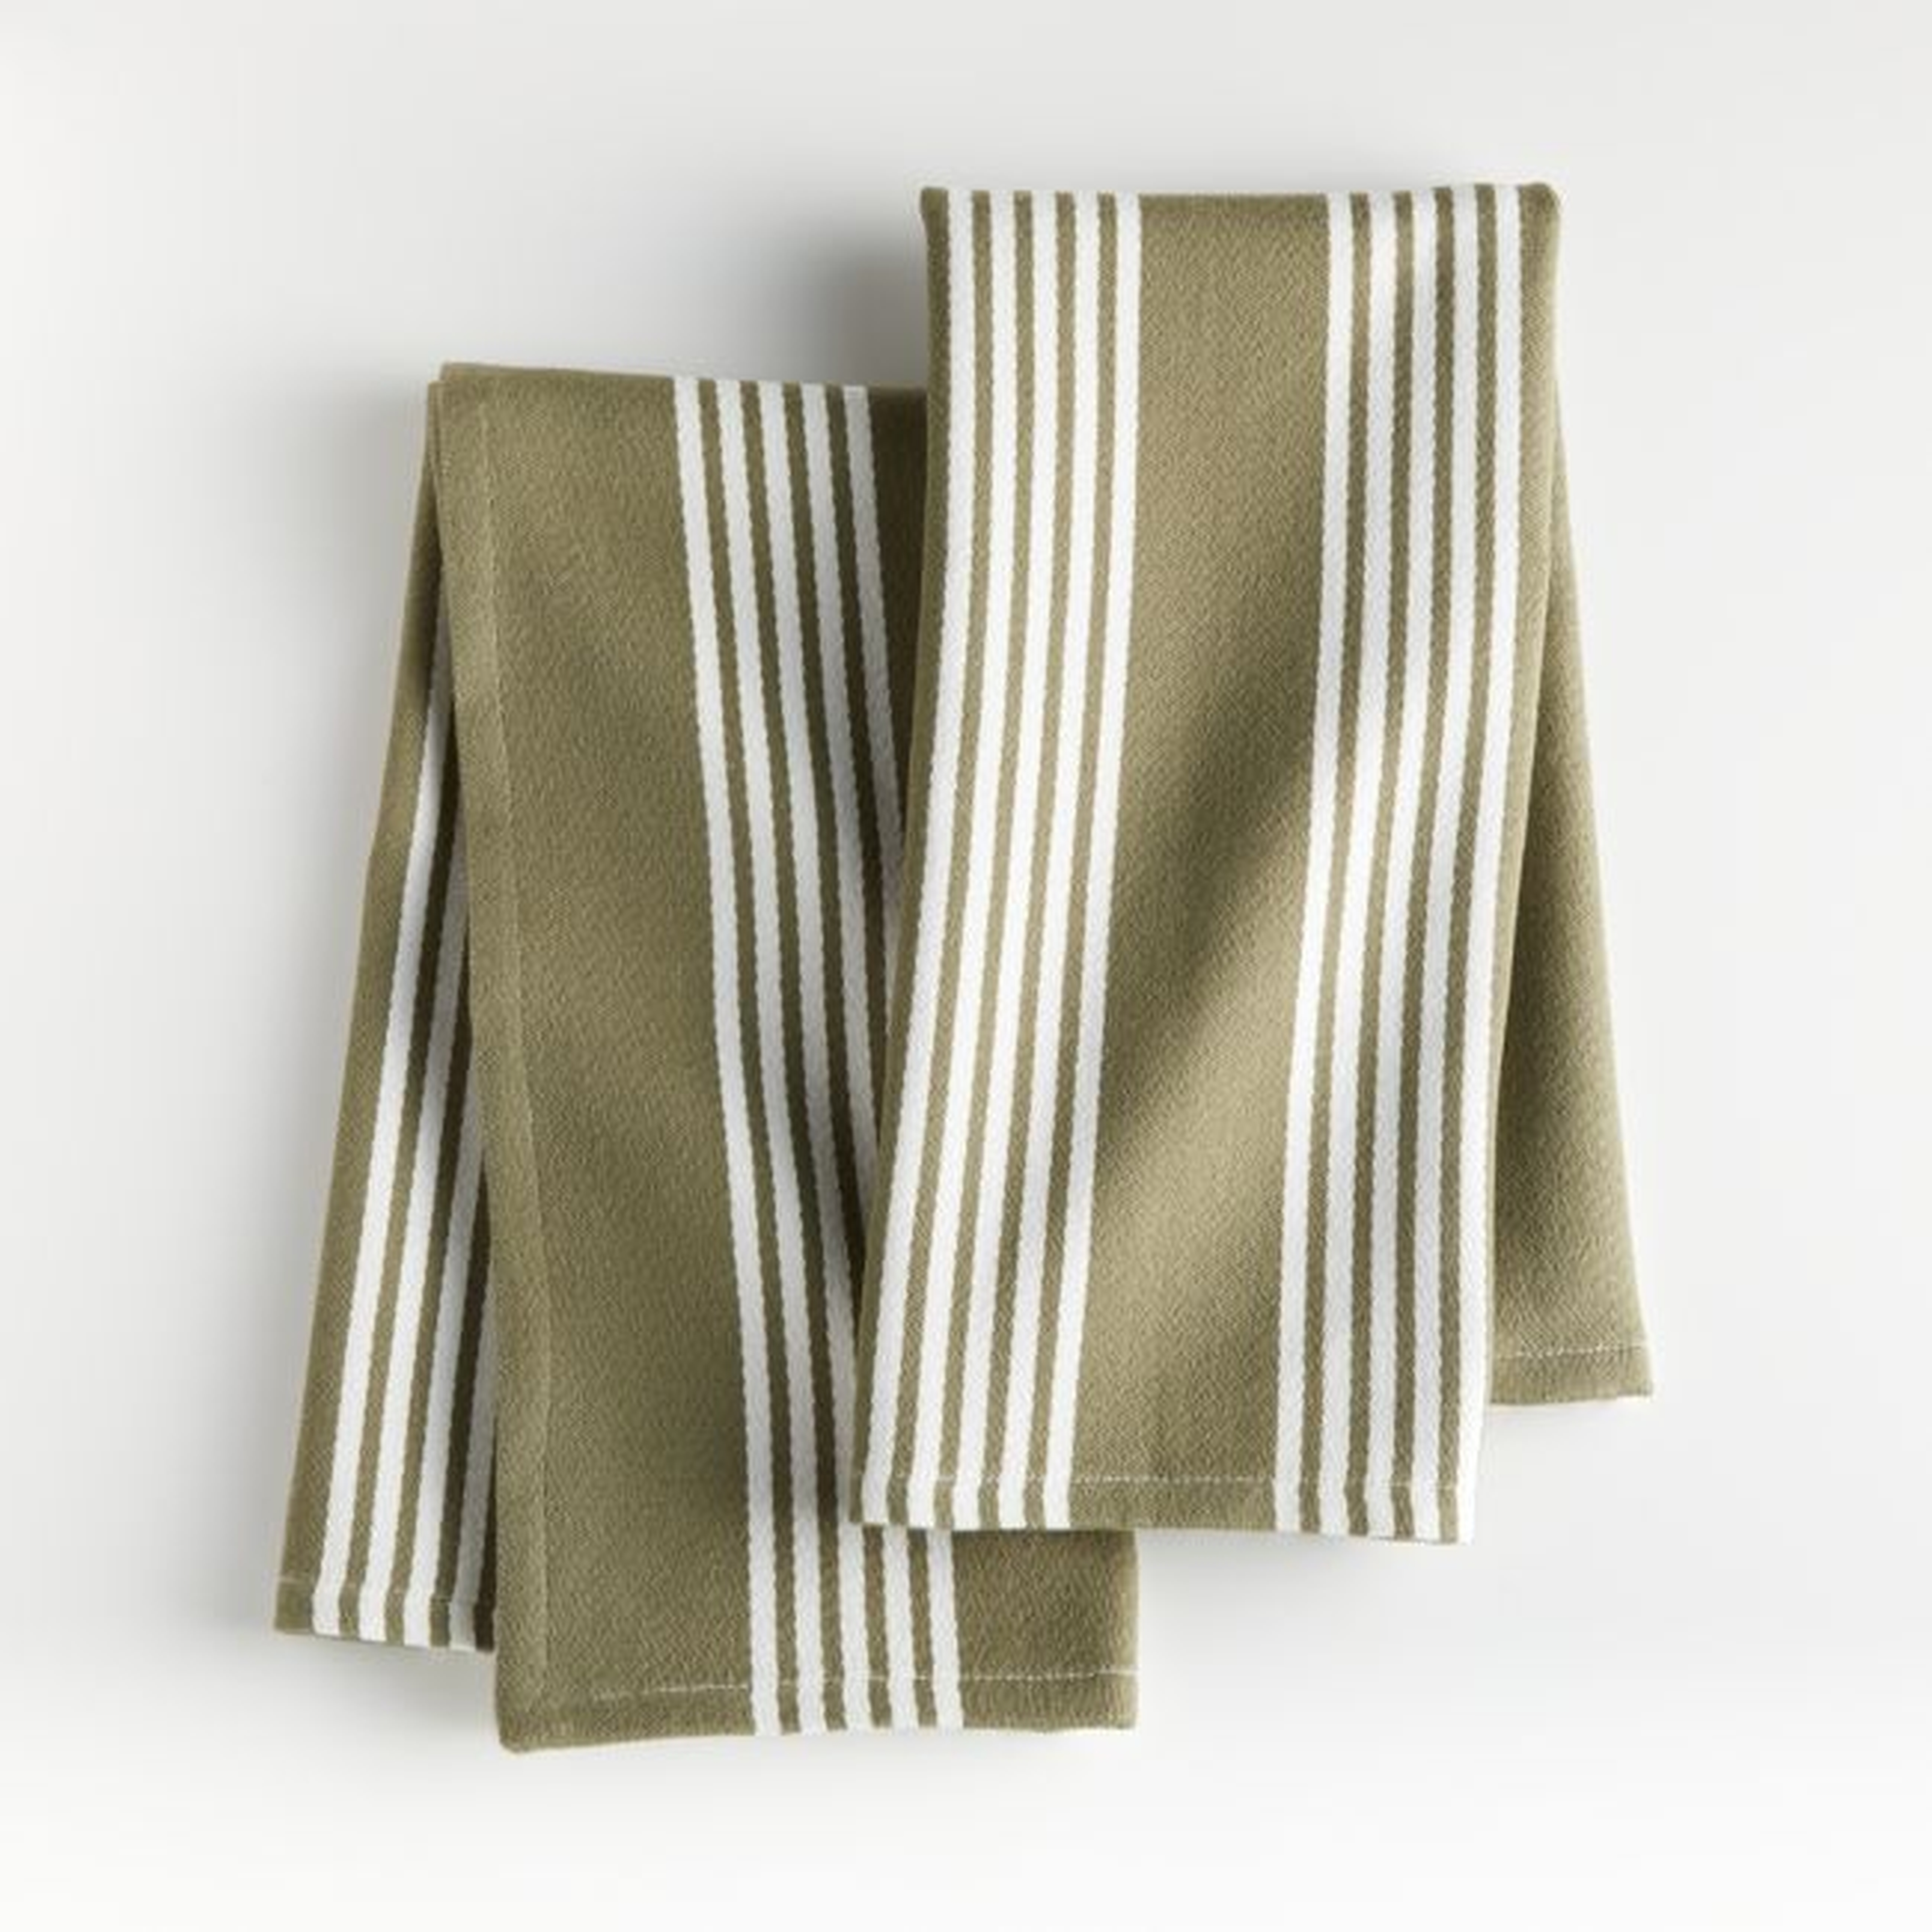 Olive Stripe Dish Towels, Set of 2 - Crate and Barrel